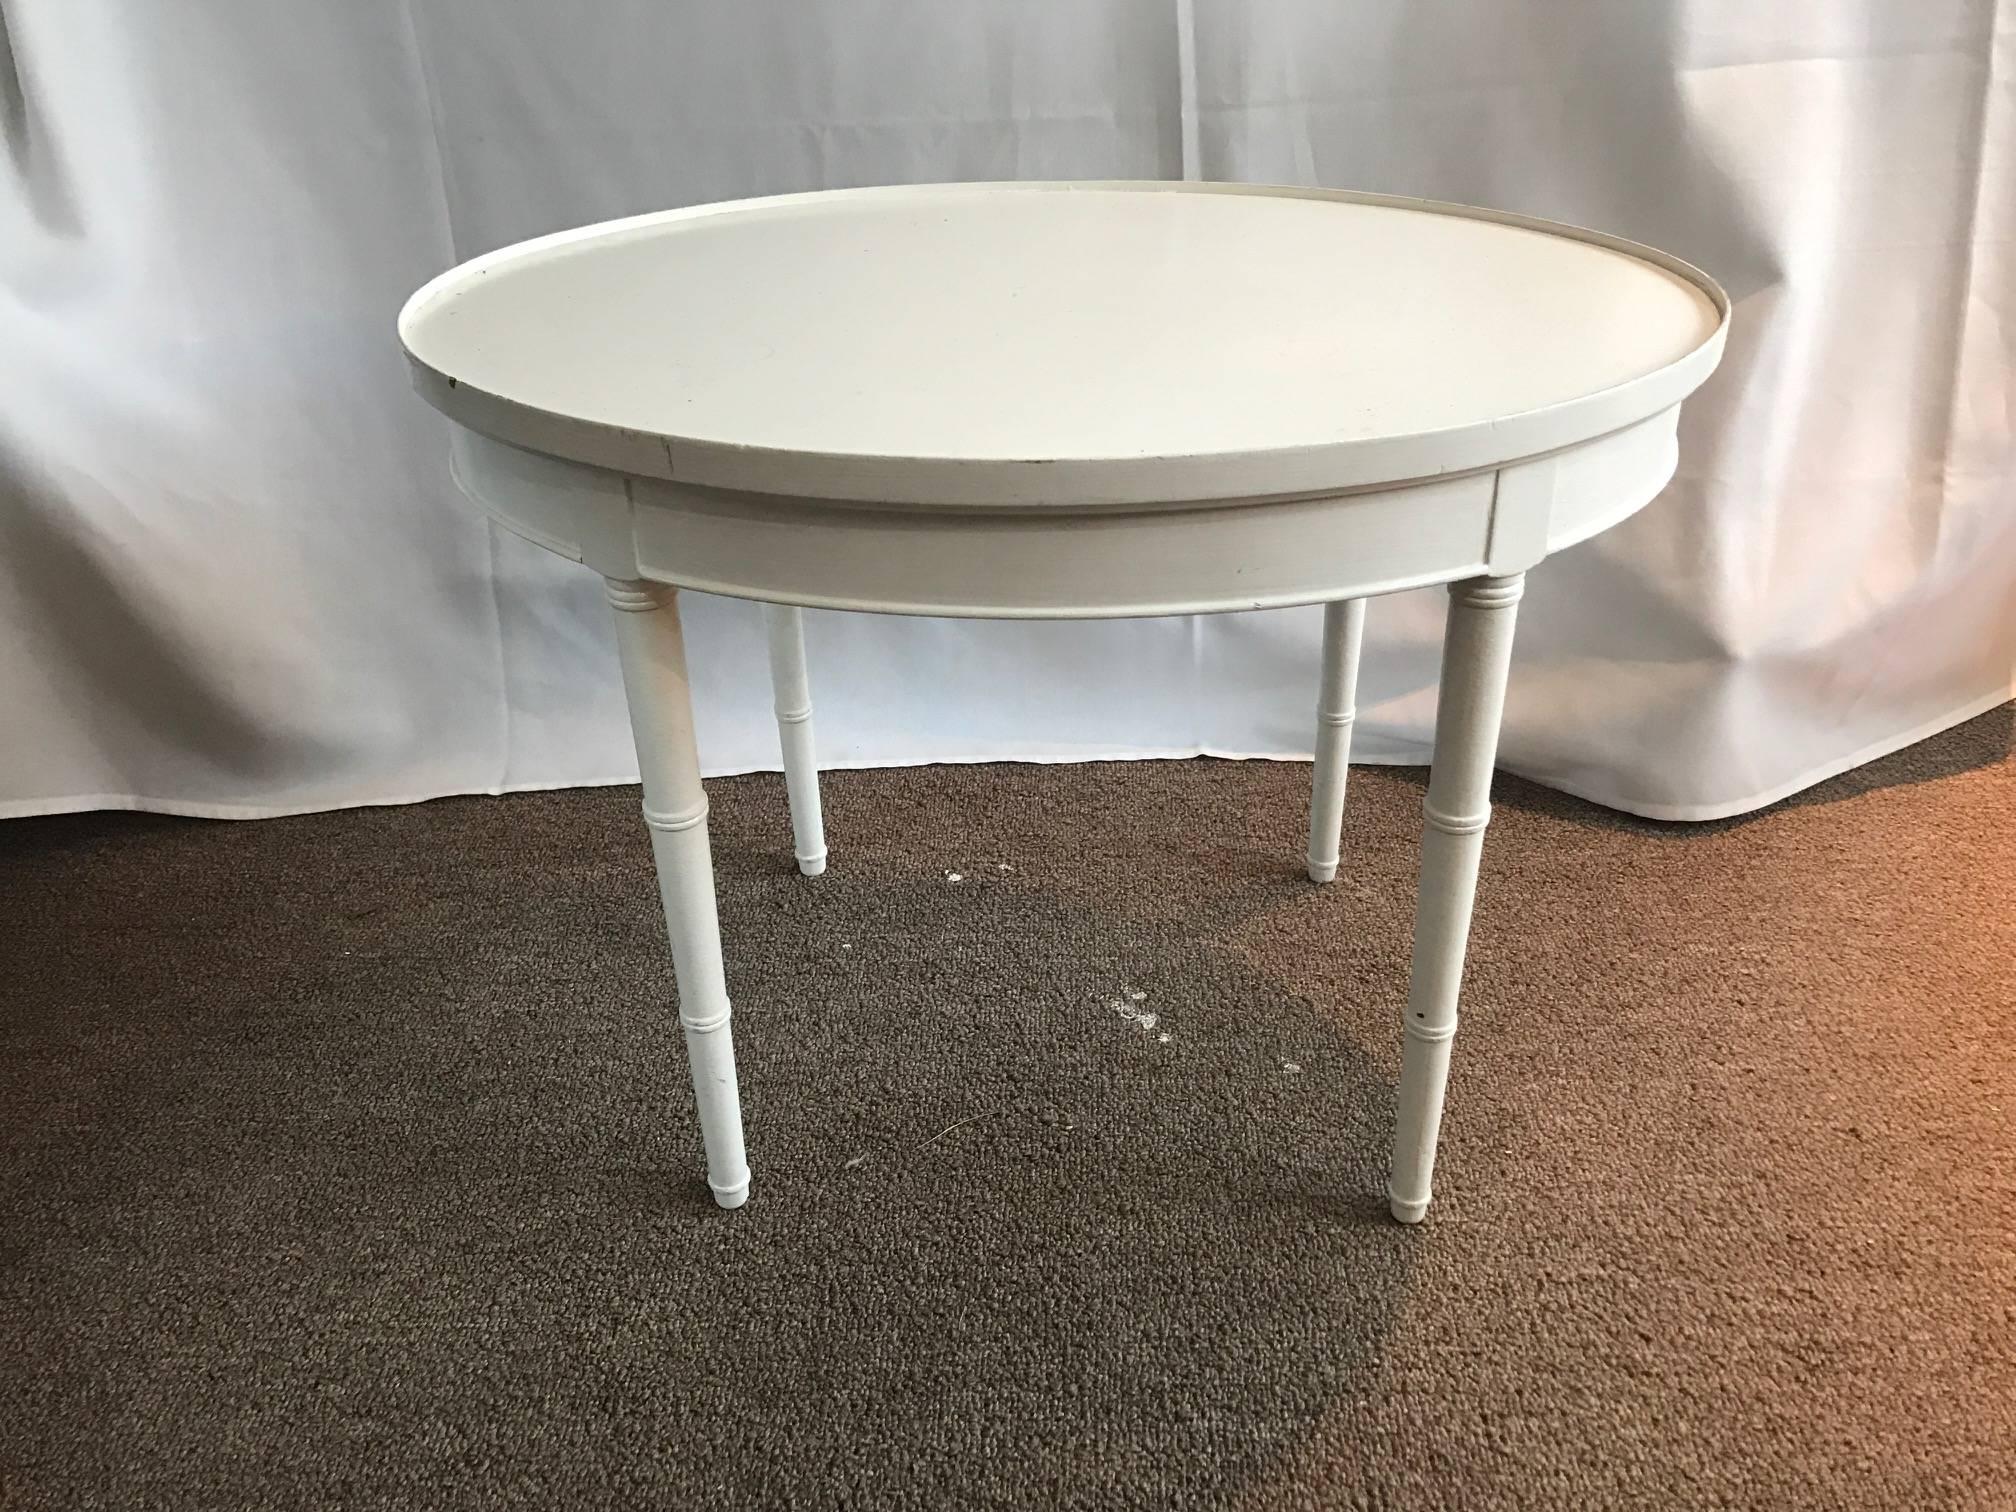 Early 20th Century Maison Jansen Style Pretty as a Picture Petite White Wooden Side or Coffee Table